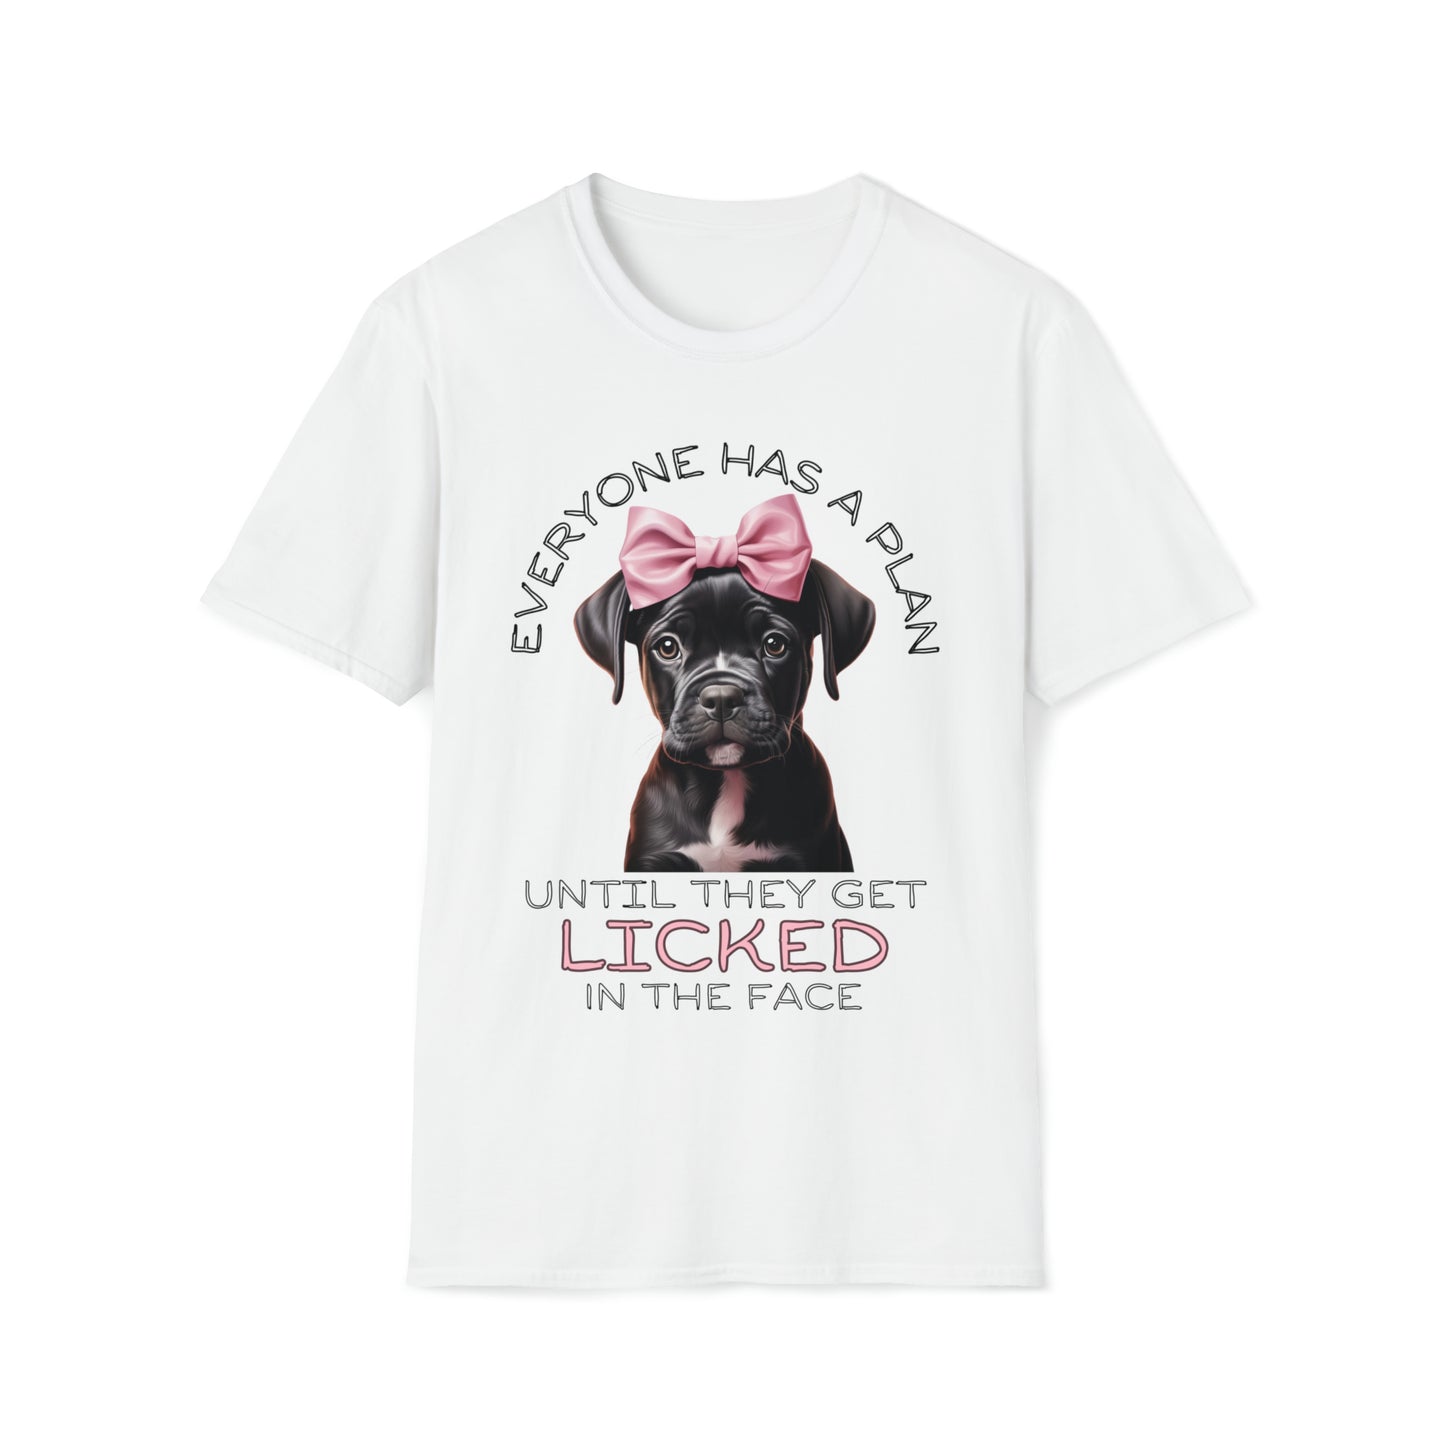 "Everyone Has a Plan Until They Get Licked in the Face" Boxer Edition - Unisex Softstyle T-Shirt